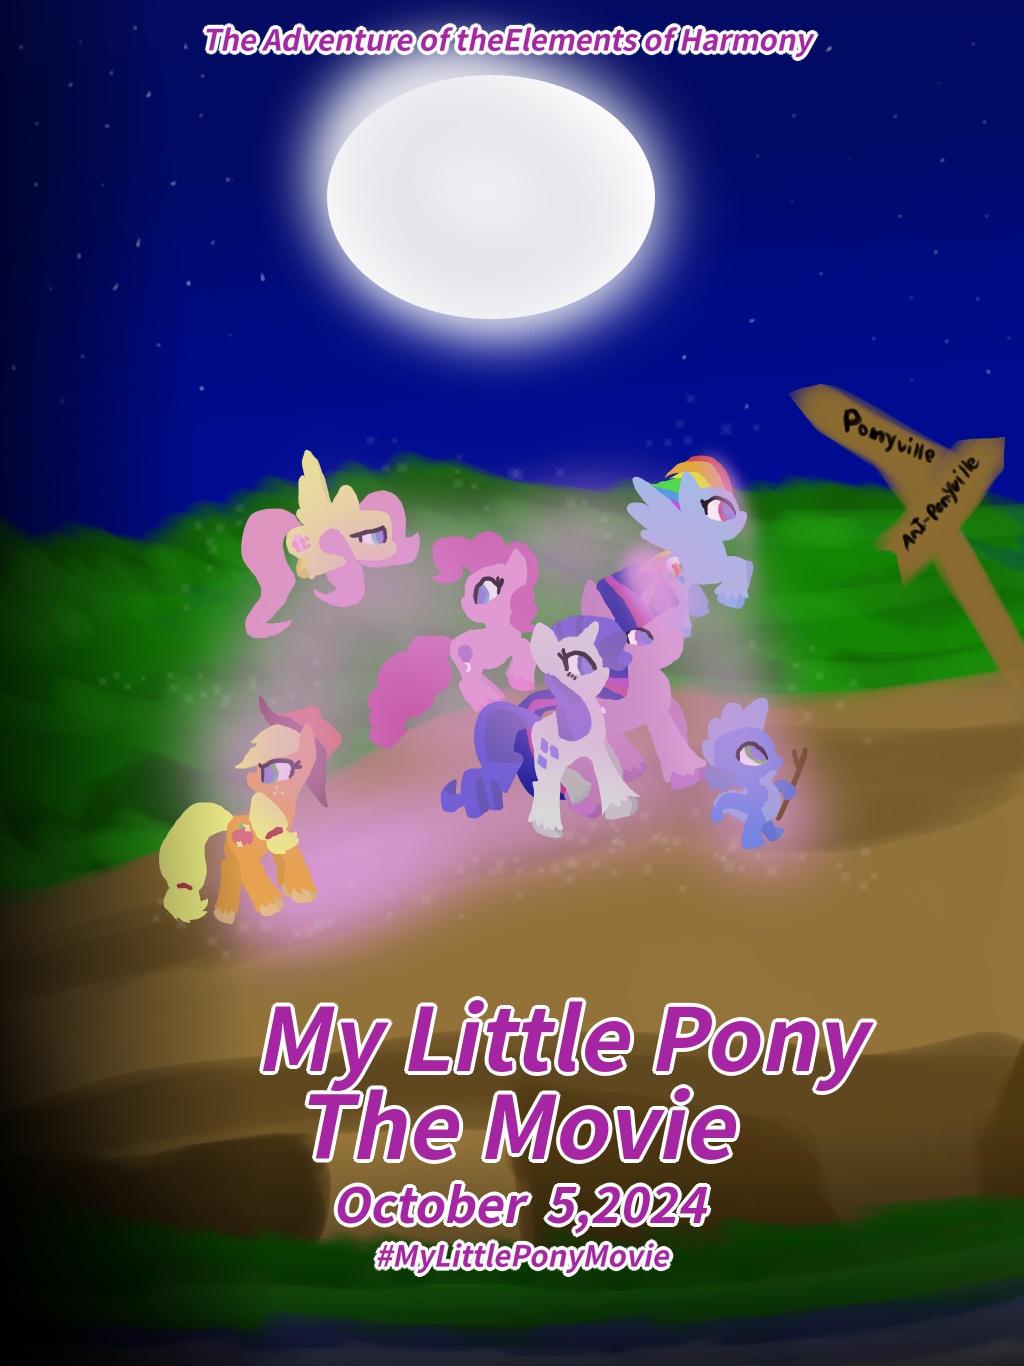 My Little Pony The Movie 2024 Poster Mane 6 and Sp by taylorwalls14 on